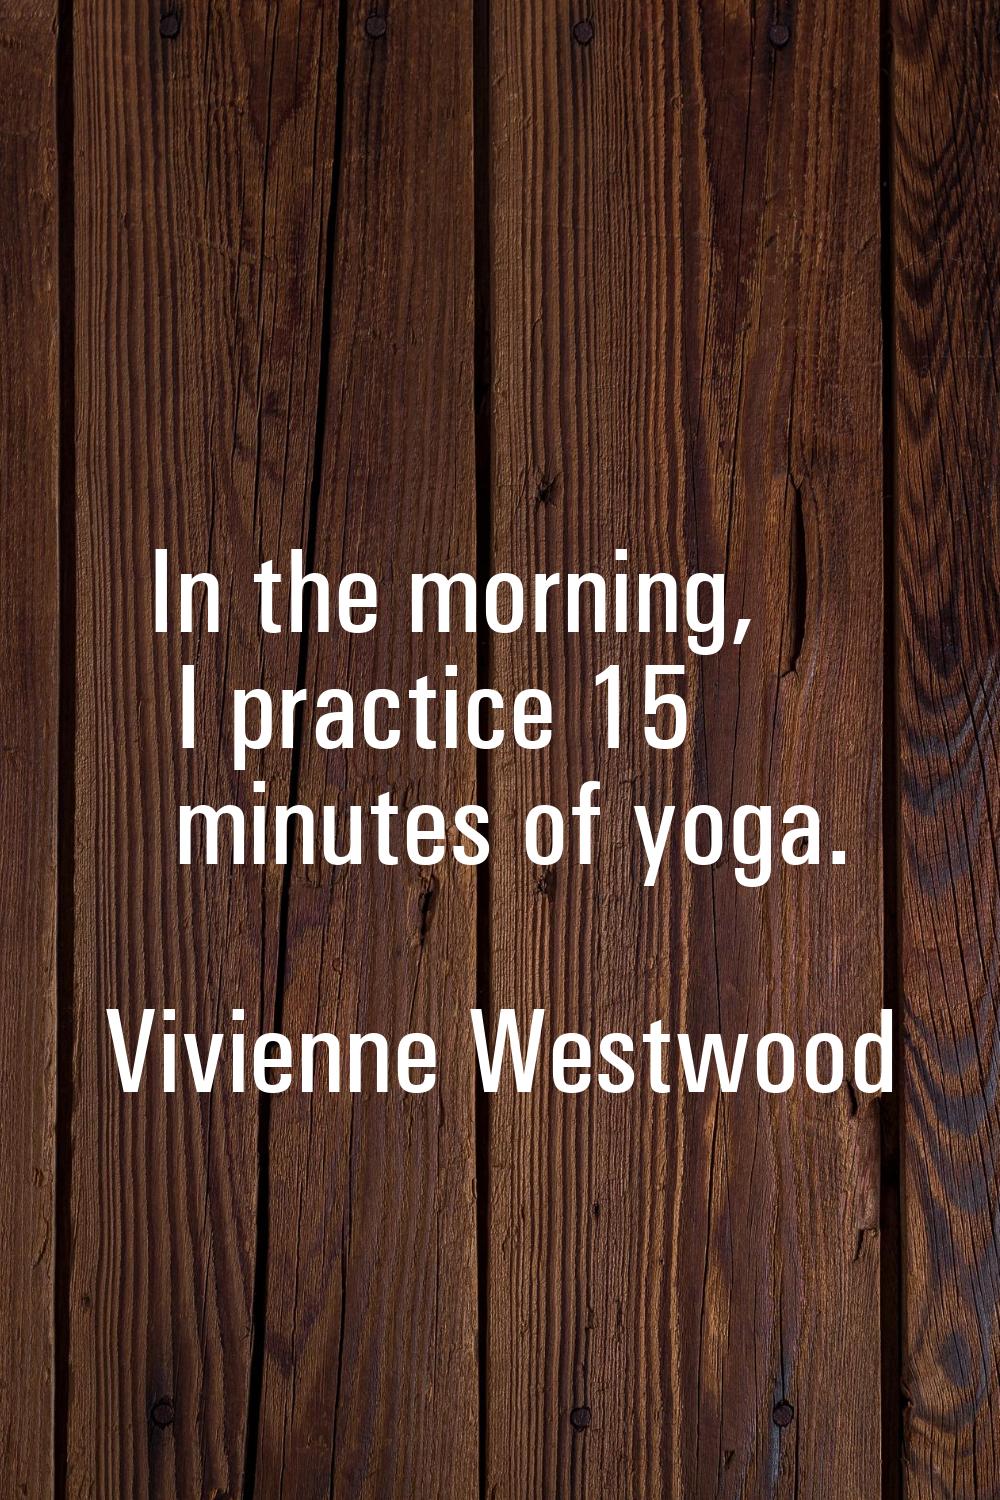 In the morning, I practice 15 minutes of yoga.